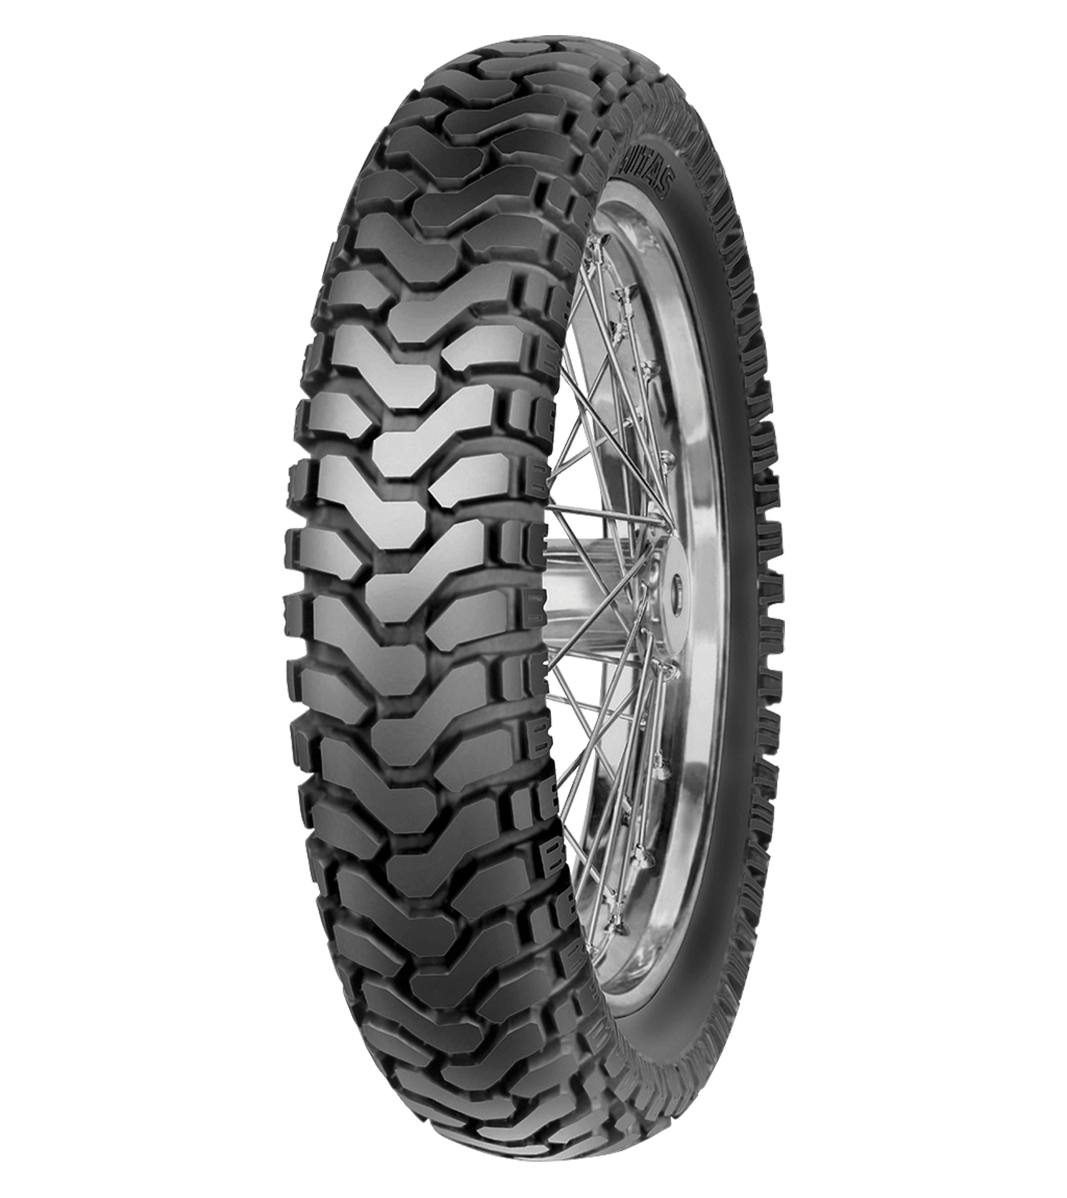 Mitas E-07 ENDURO 140/80-17 Trail OFF Trail 69T No Stripe Tubeless Rear Tire, 224406, 140/80-17, Adventure Touring, E Series, E-07 Enduro, Rear, Trail, Trail OFF, Tires - Imported and distributed in North &amp; South America by Lindeco Genuine Powersports - Premier Powersports Equipment and Accessories for Motorcycle Enthusiasts, Professional Riders and Dealers.